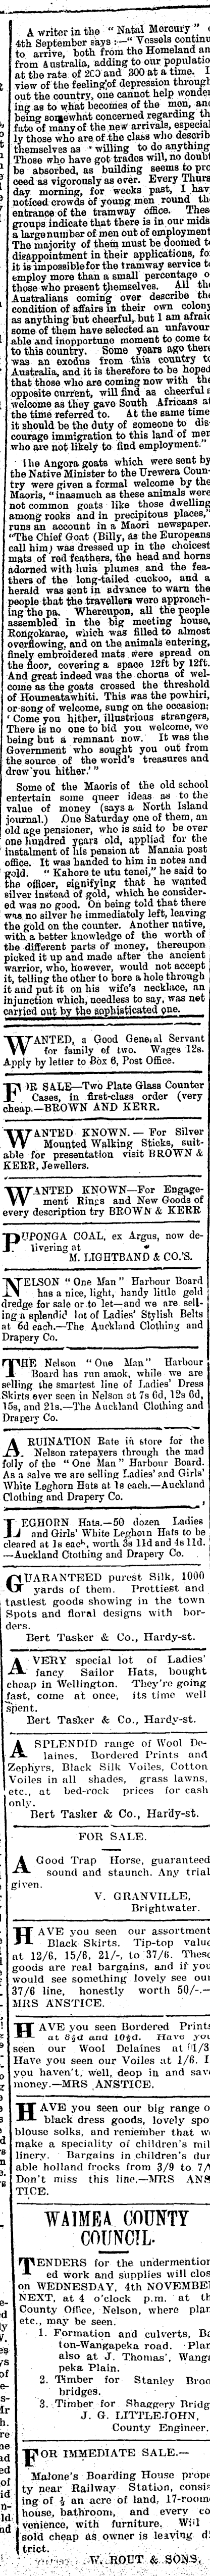 Papers | Newspapers | Nelson Evening Mail | 26 October 1903 | Page 3 Column